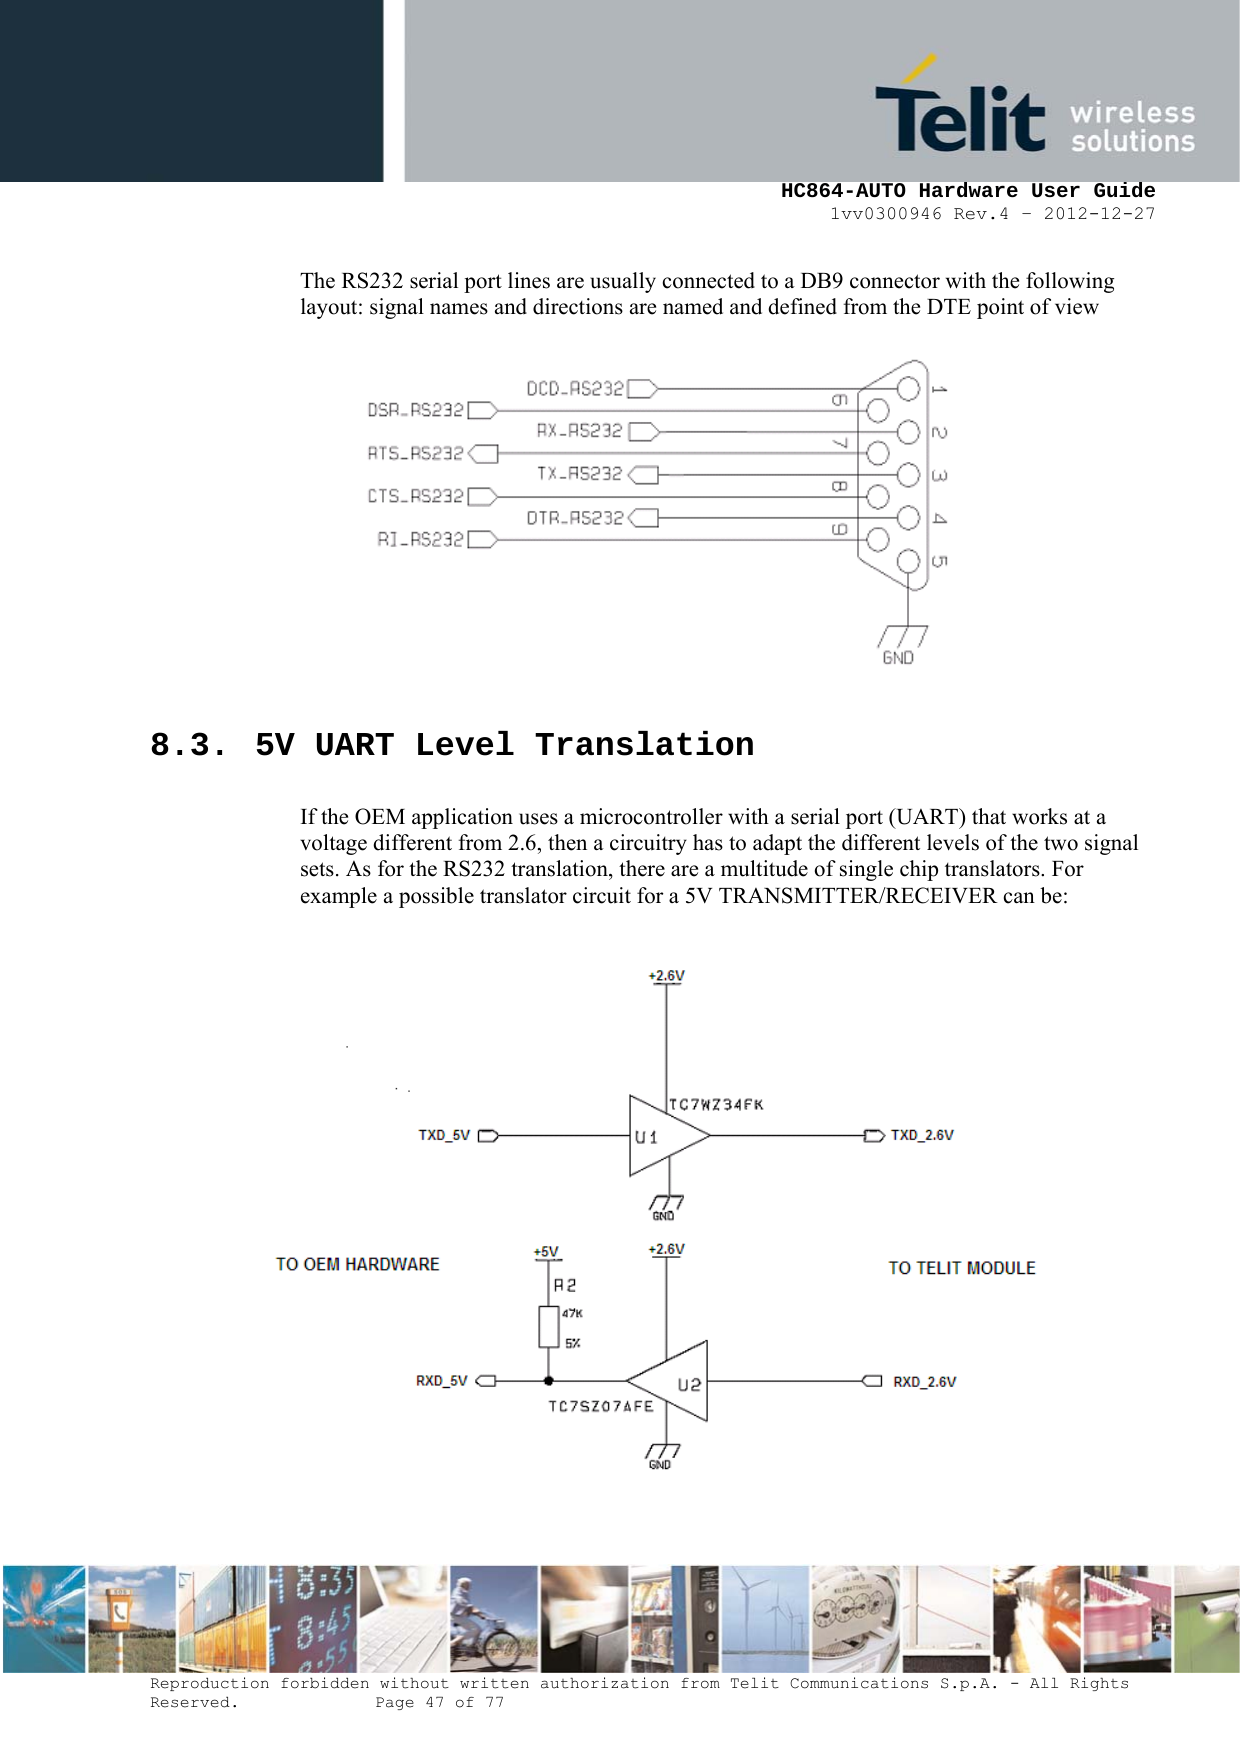     HC864-AUTO Hardware User Guide 1vv0300946 Rev.4 – 2012-12-27 Reproduction forbidden without written authorization from Telit Communications S.p.A. - All Rights Reserved.    Page 47 of 77  The RS232 serial port lines are usually connected to a DB9 connector with the following layout: signal names and directions are named and defined from the DTE point of view  8.3. 5V UART Level Translation If the OEM application uses a microcontroller with a serial port (UART) that works at a voltage different from 2.6, then a circuitry has to adapt the different levels of the two signal sets. As for the RS232 translation, there are a multitude of single chip translators. For example a possible translator circuit for a 5V TRANSMITTER/RECEIVER can be:    